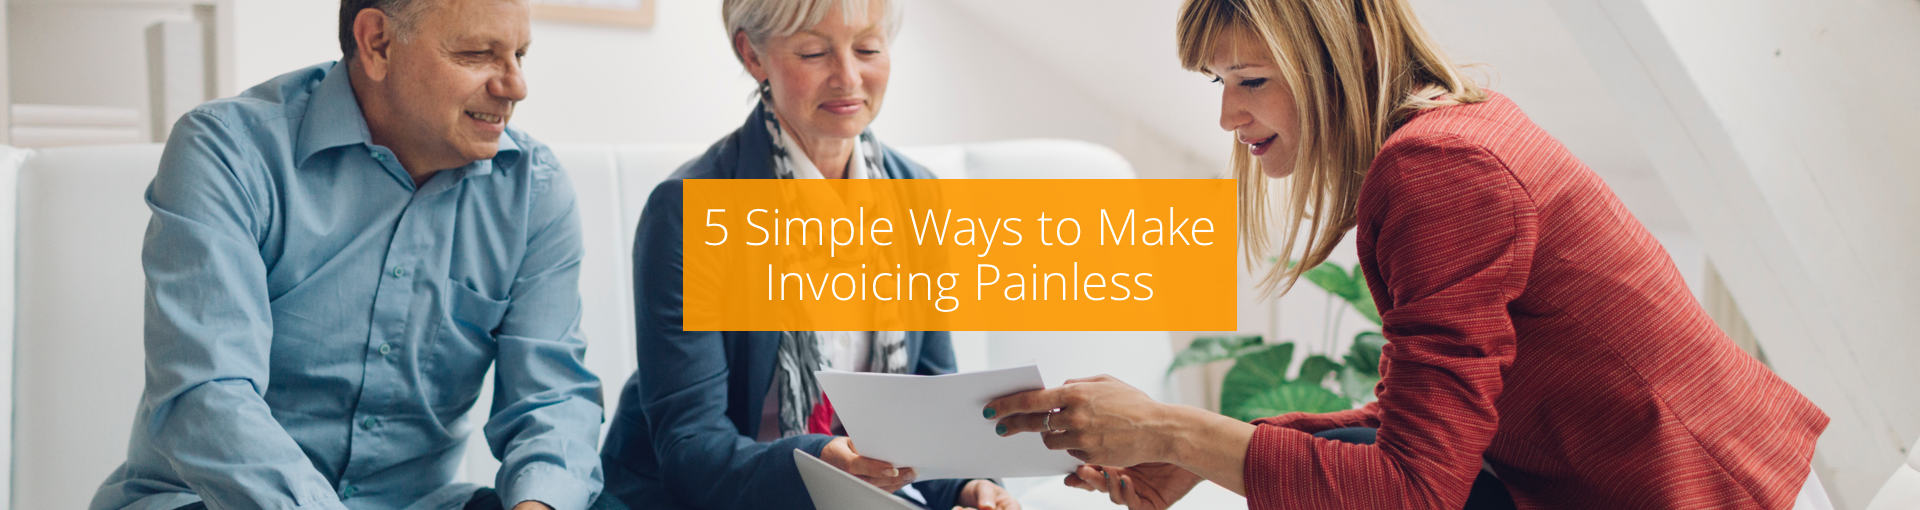 5 Simple Ways to Make Invoicing Painless Featured Image